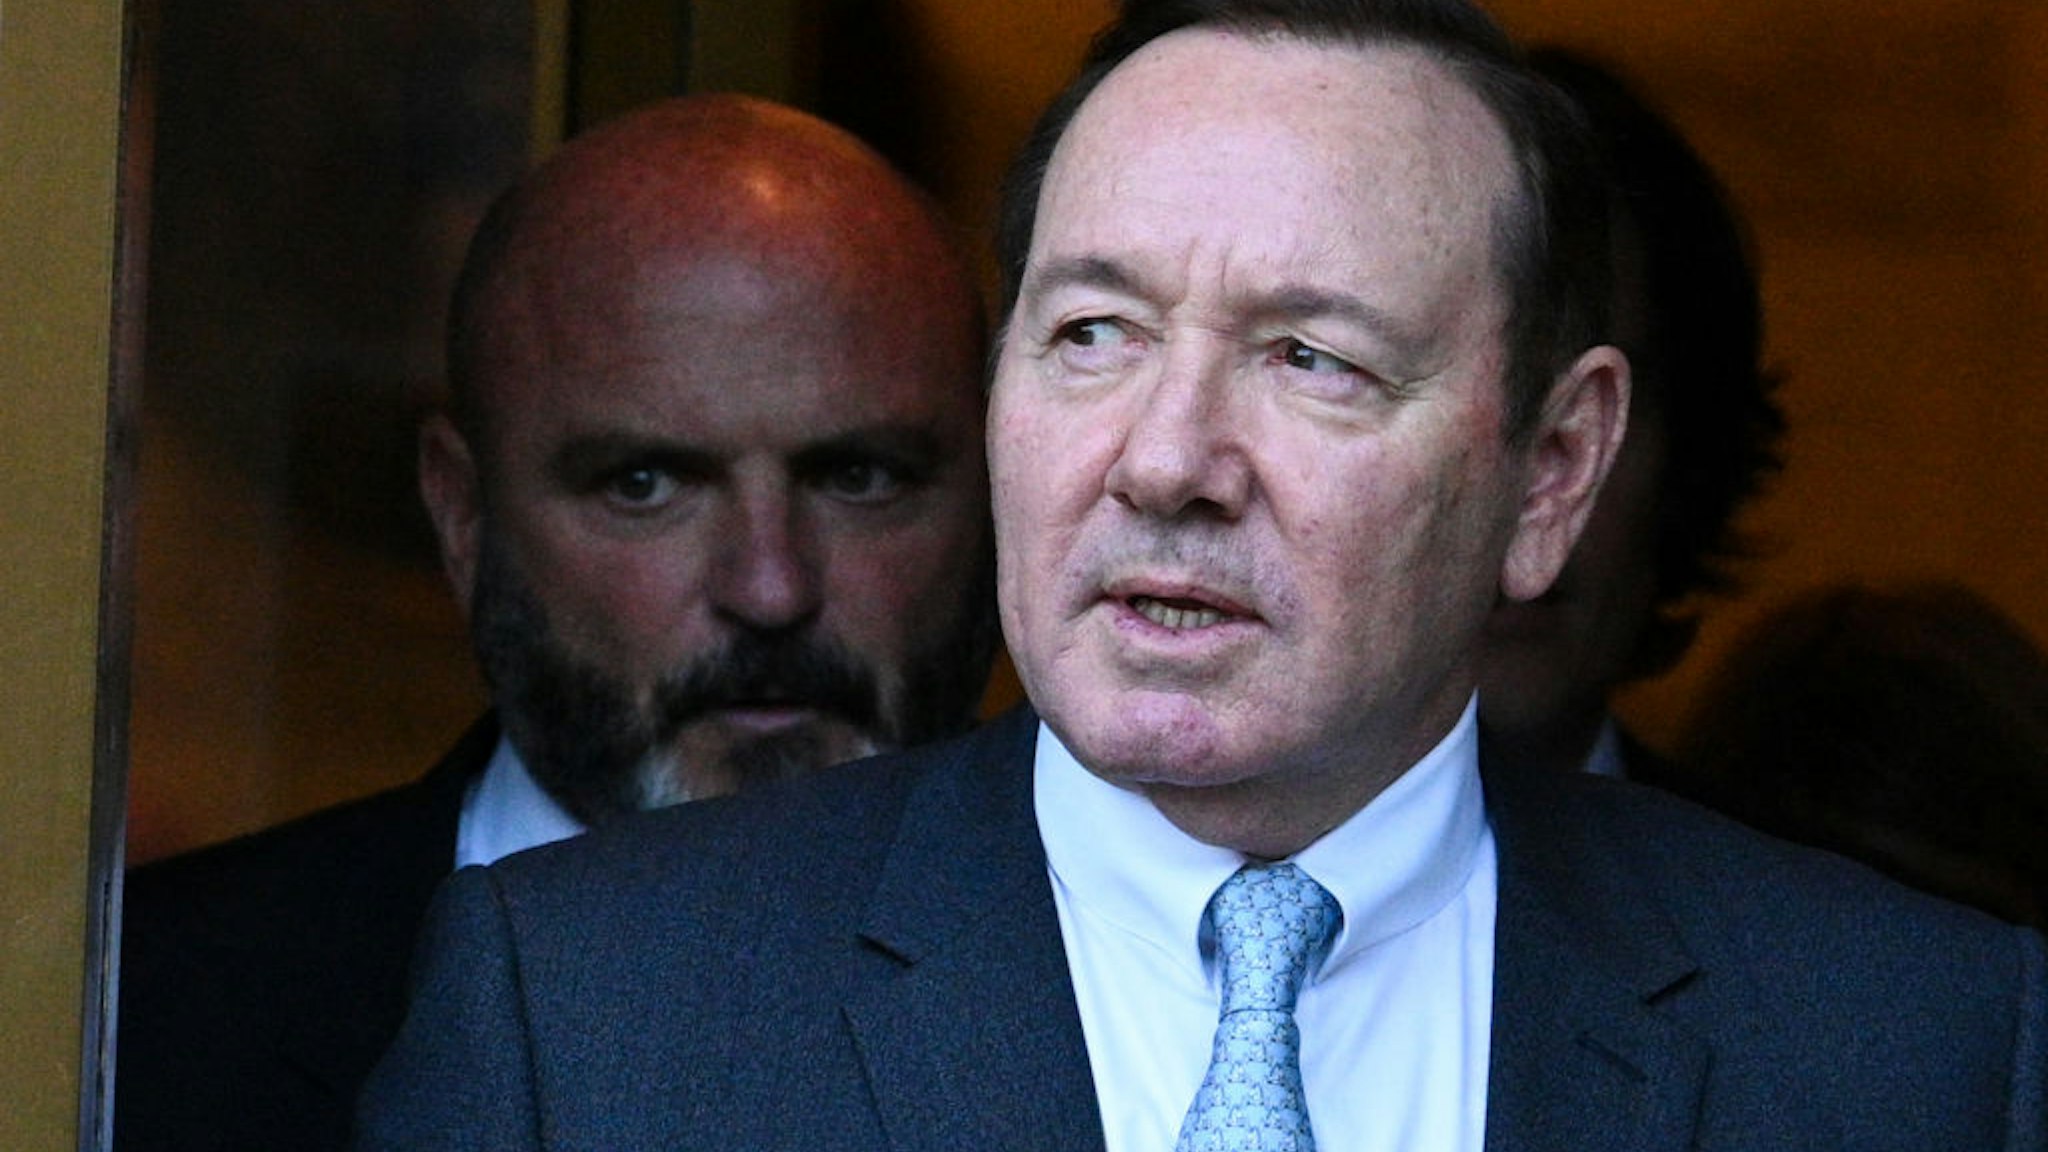 NEW YORK, NEW YORK - OCTOBER 06: Actor Kevin Spacey leaves the US District Courthouse on October 06, 2022 in New York City. Spacey’s trial began today with jury selection after allegations of alleged sexual misconduct surfaced in 2017 by actor Anthony Rapp. (Photo by Alexi J. Rosenfeld/Getty Images)